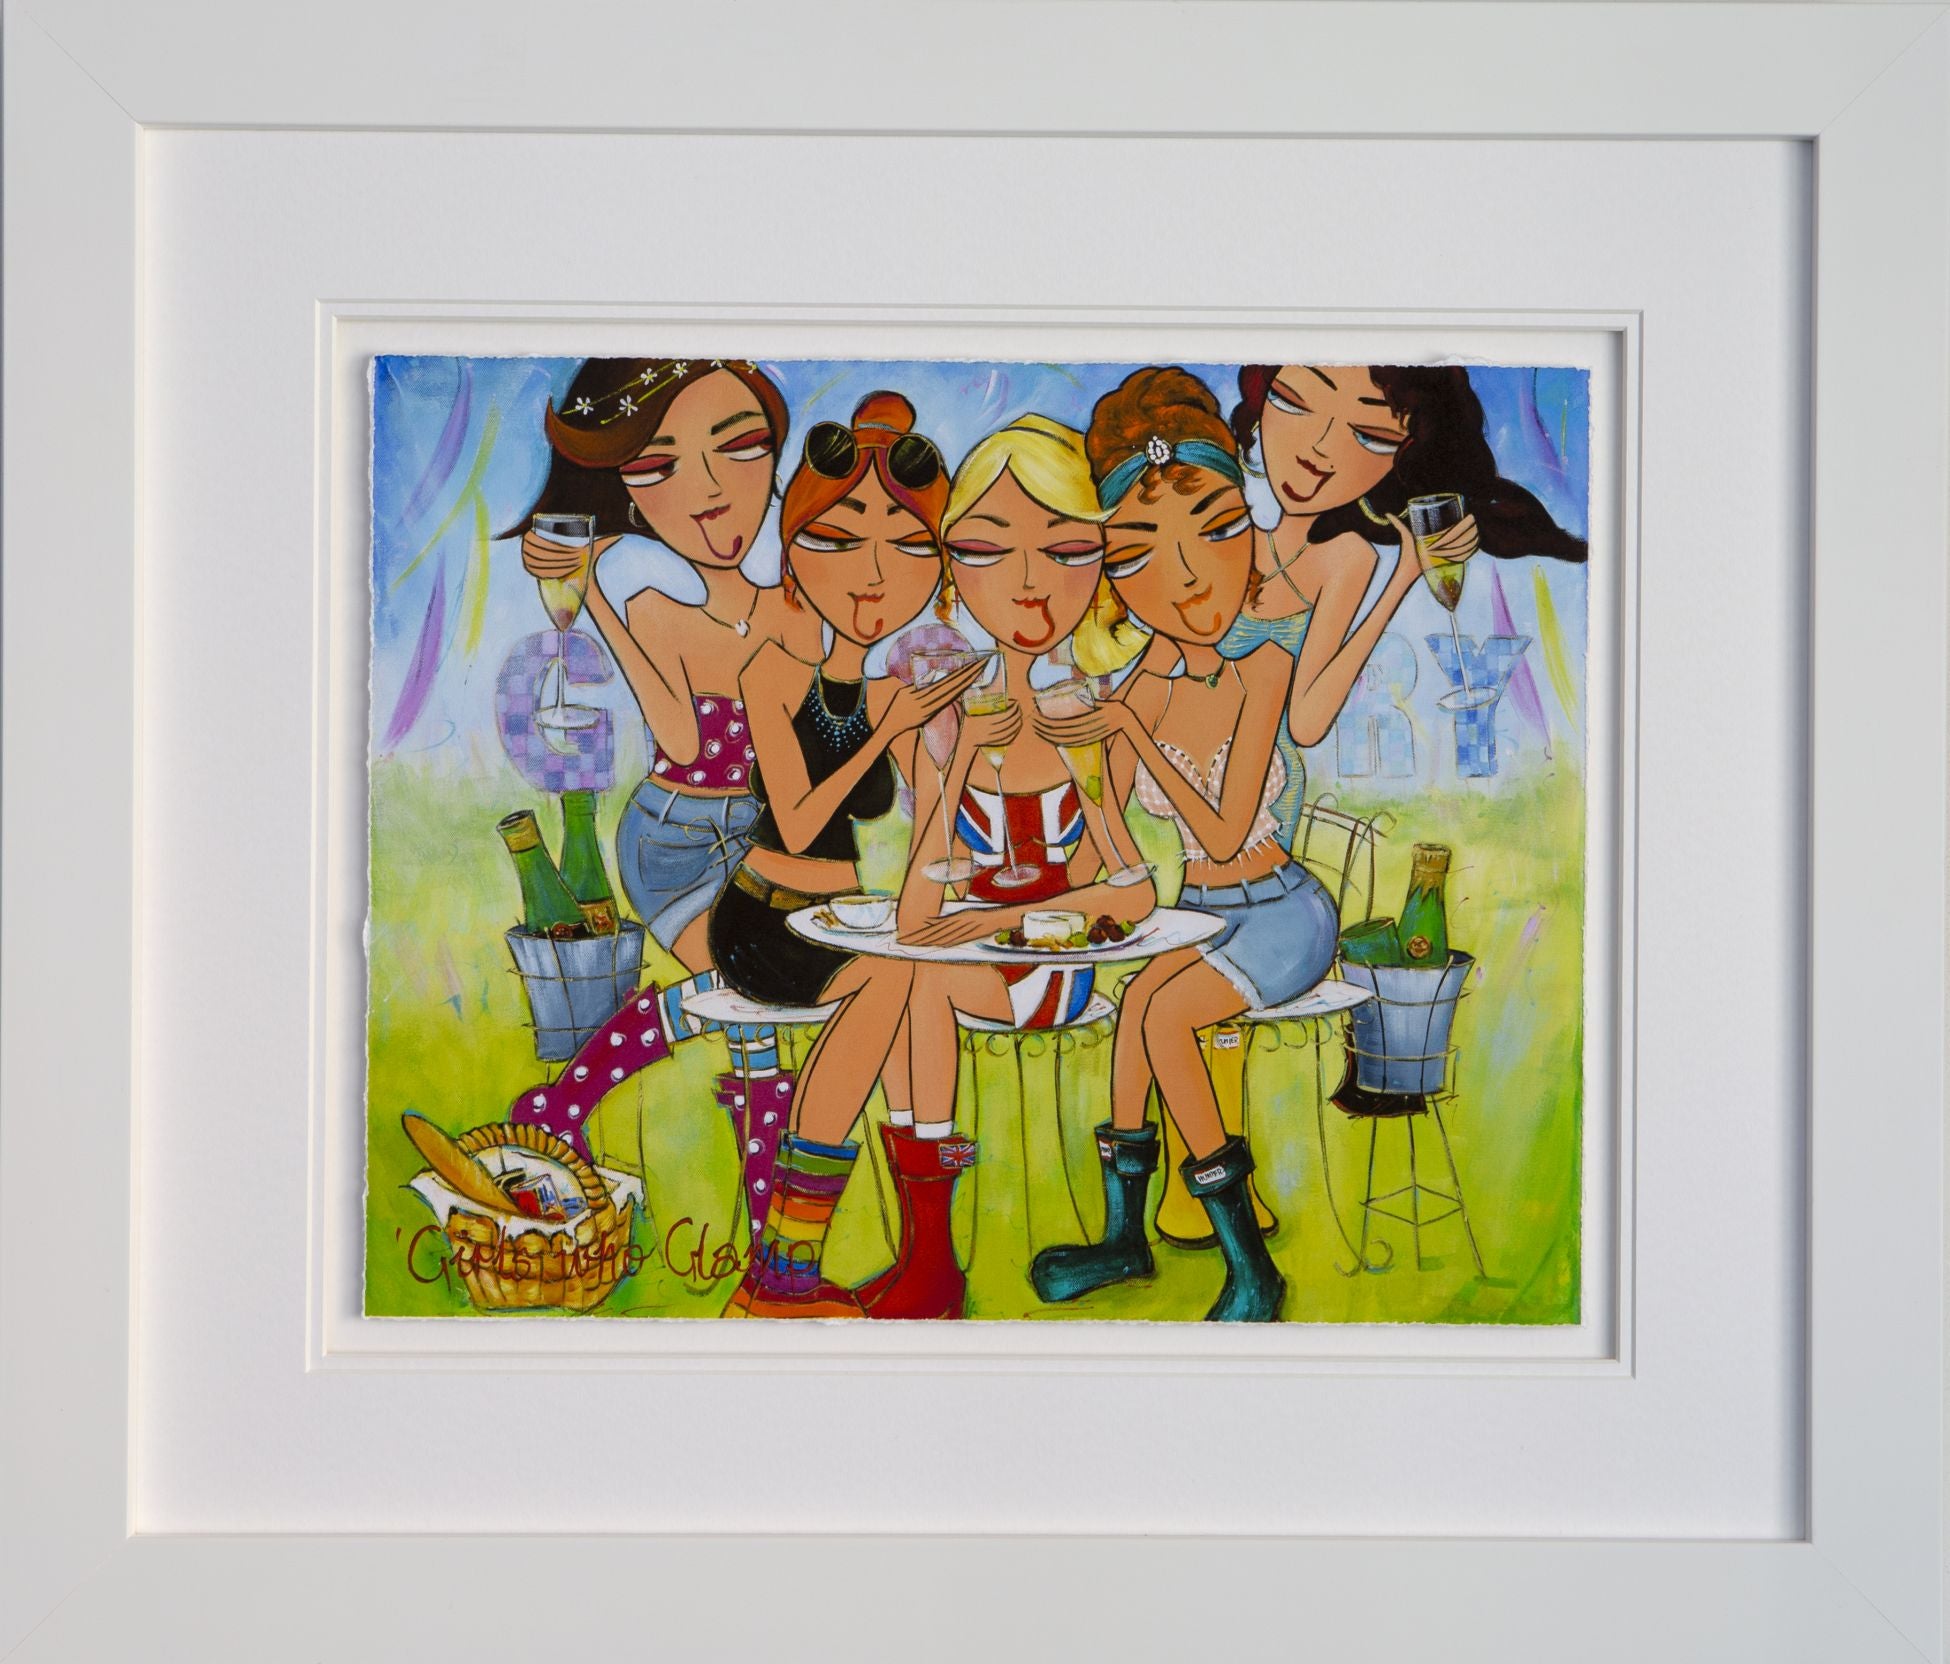 Natalie Dyer - 'Girls Who Glamp' - Limited Edition Print